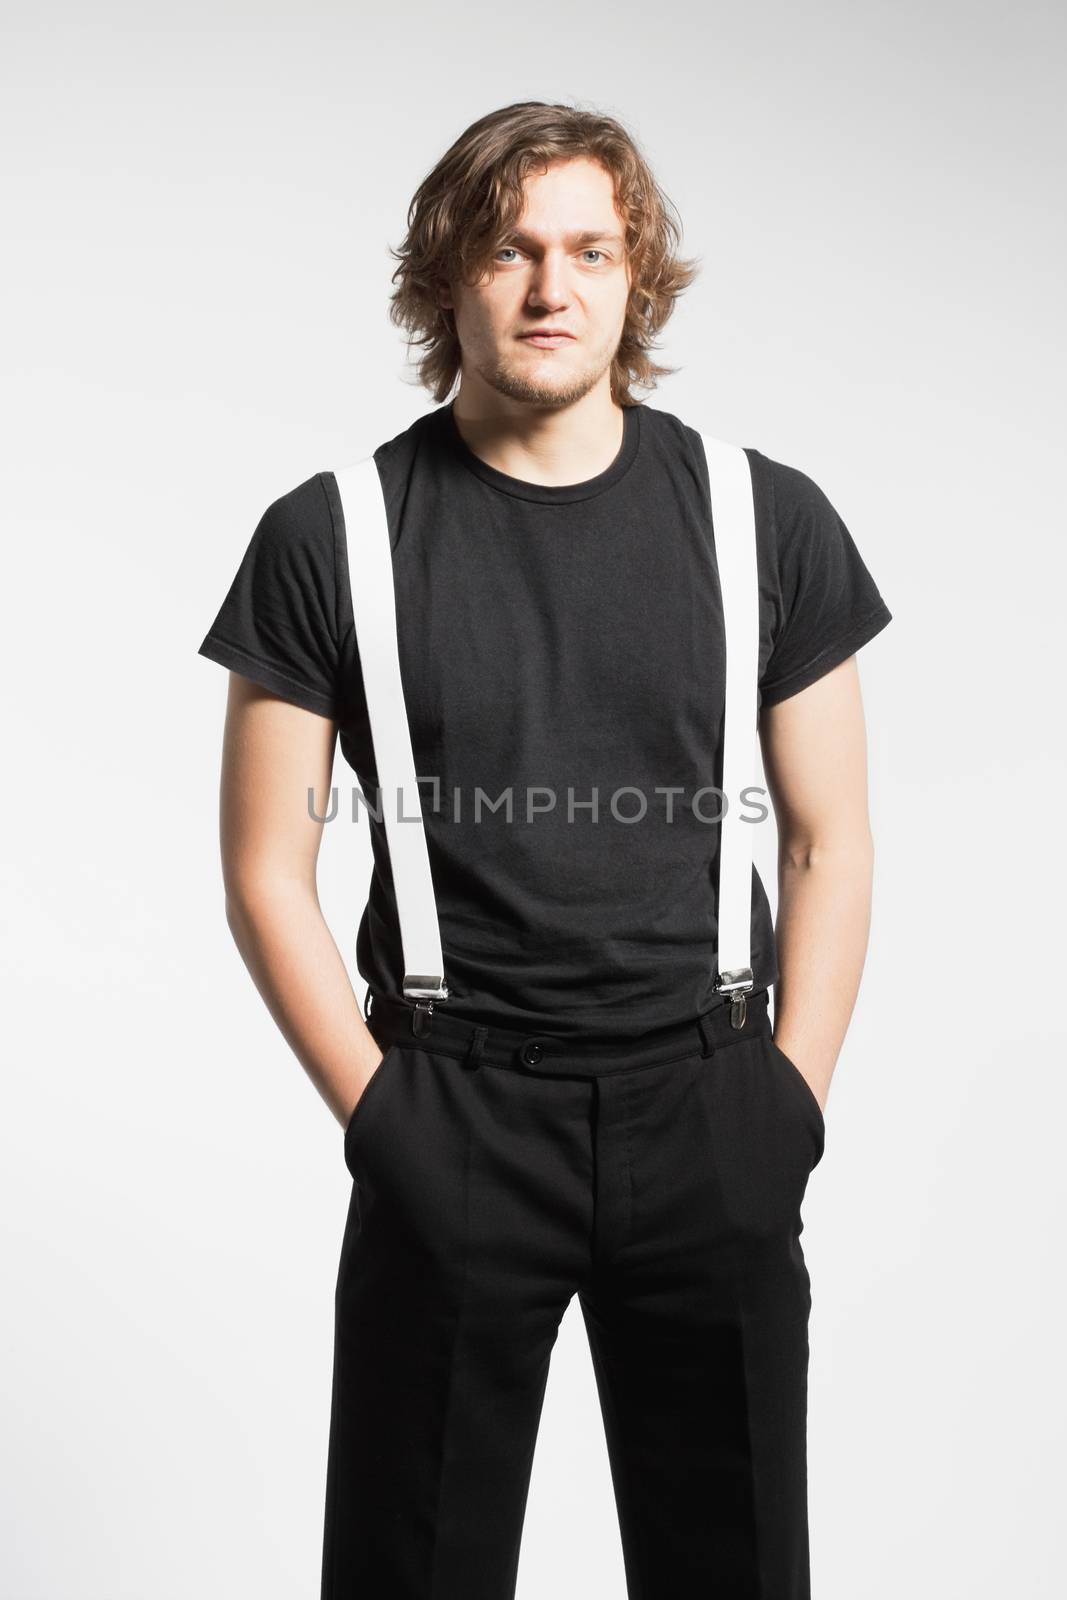 Portrait of a Young Man with Brown Hair and Suspenders